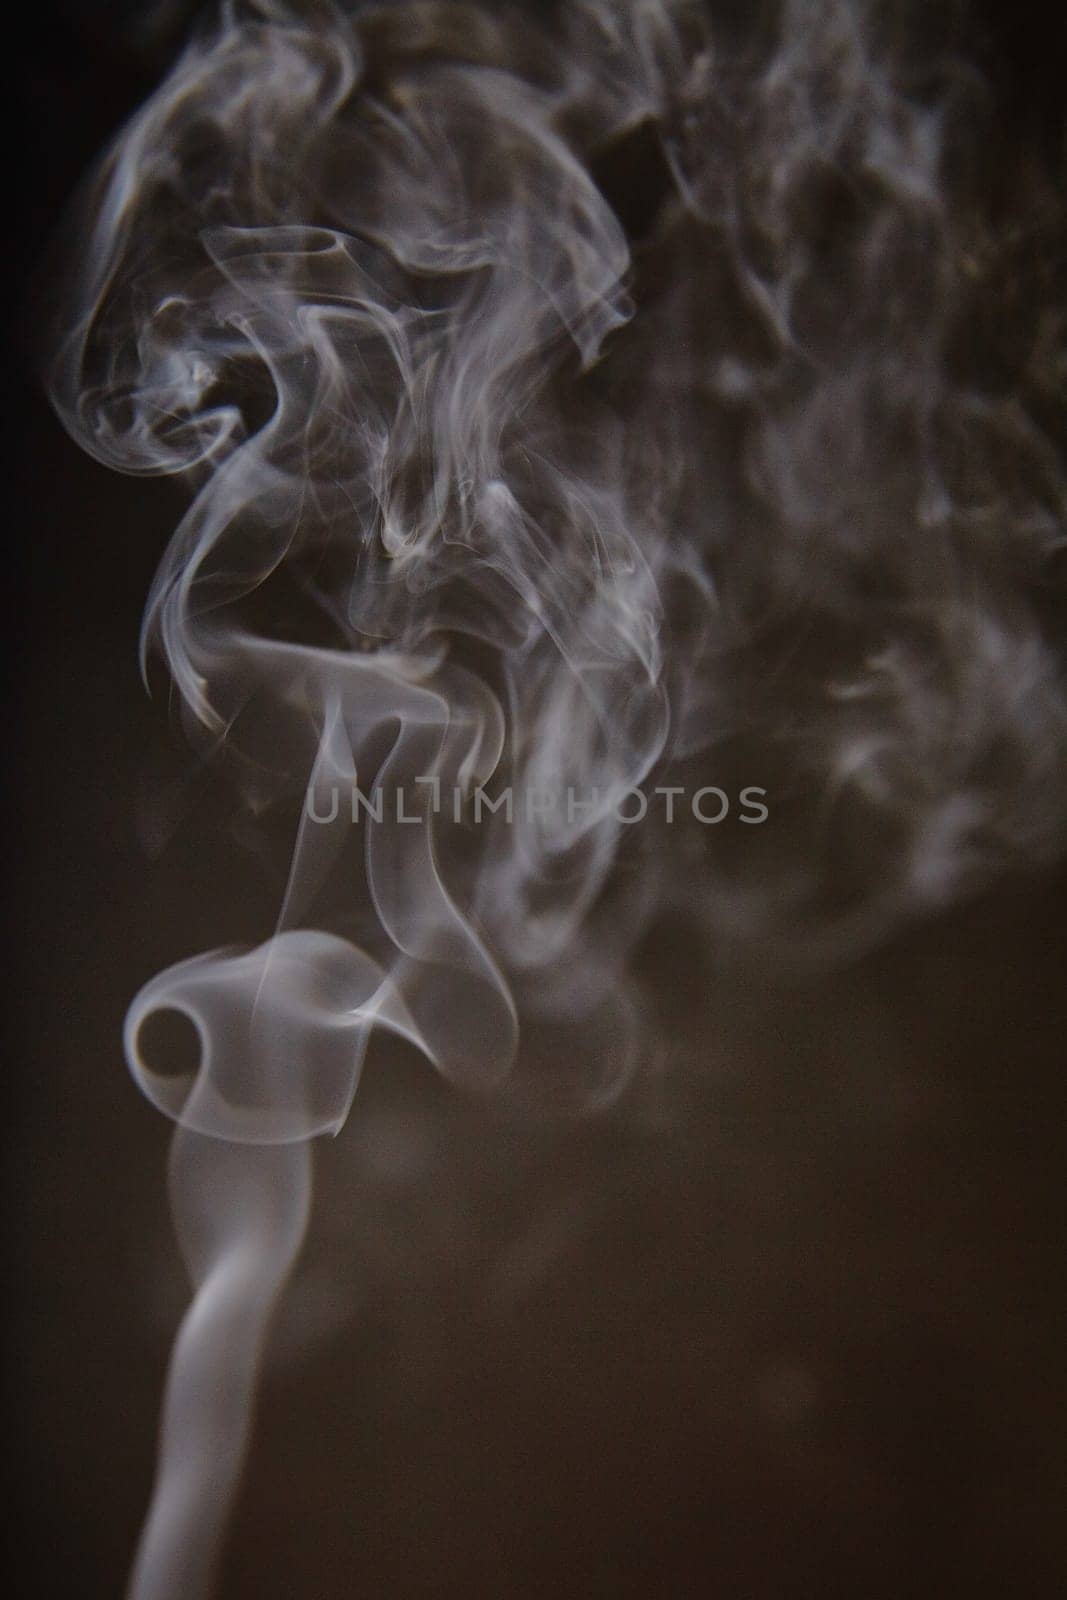 Captivating ethereal smoke gracefully swirls against a dark backdrop, creating an intriguing, mysterious atmosphere. Perfect for evoking creativity, transformation, and the intangible.